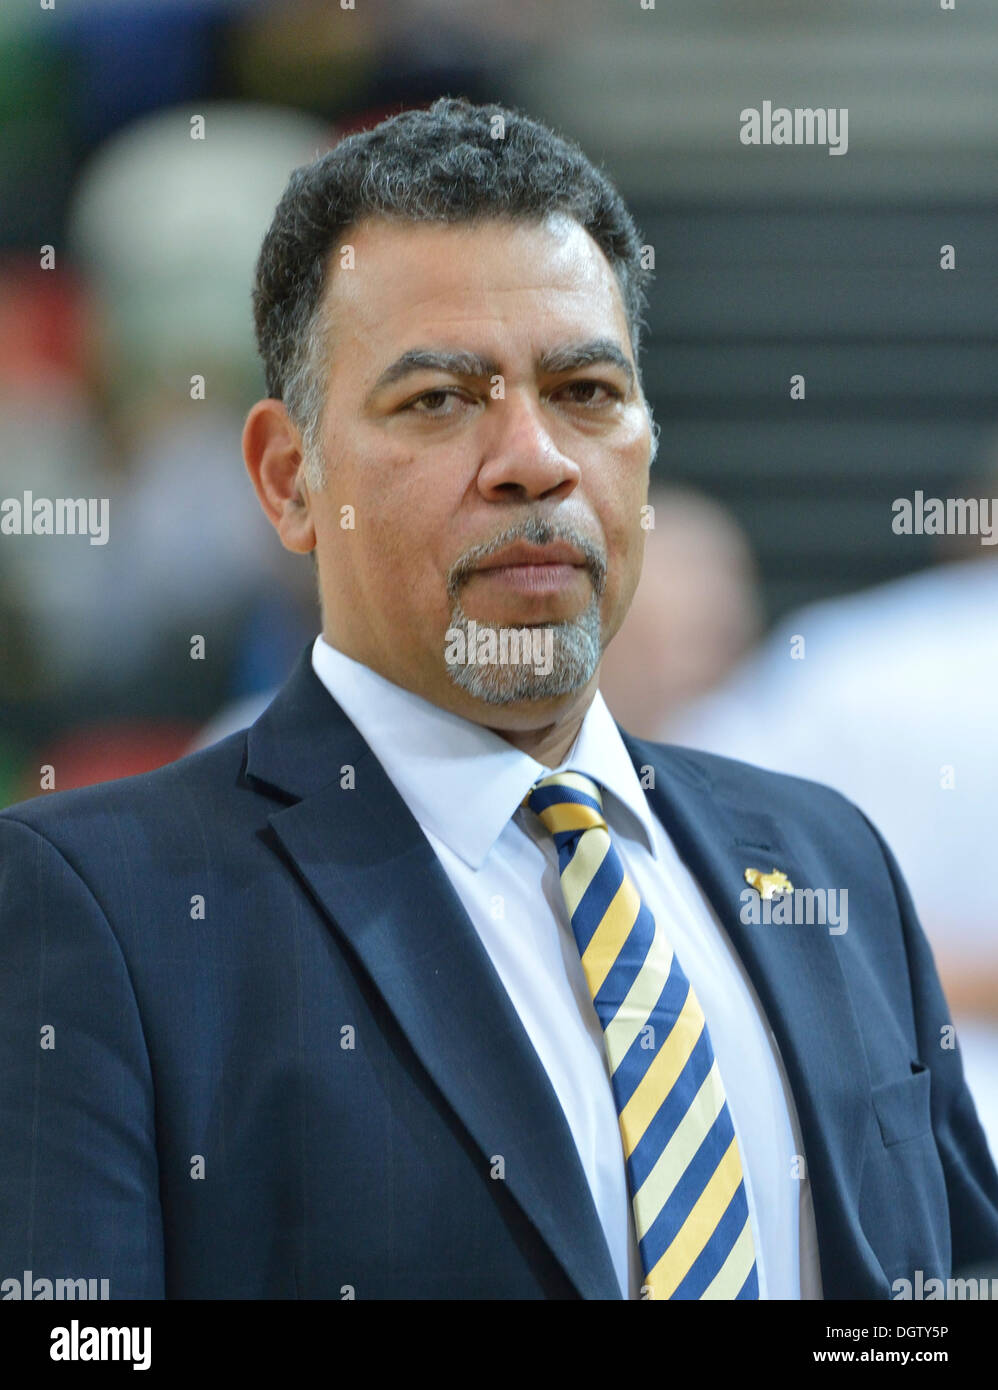 London, UK. 25th Oct, 2013.   London Lions Vince Macauley [Head Coach] during the Lions 100-92 win over the Plymouth Raiders.  © Stephen Bartholomew/Alamy Live News Stock Photo